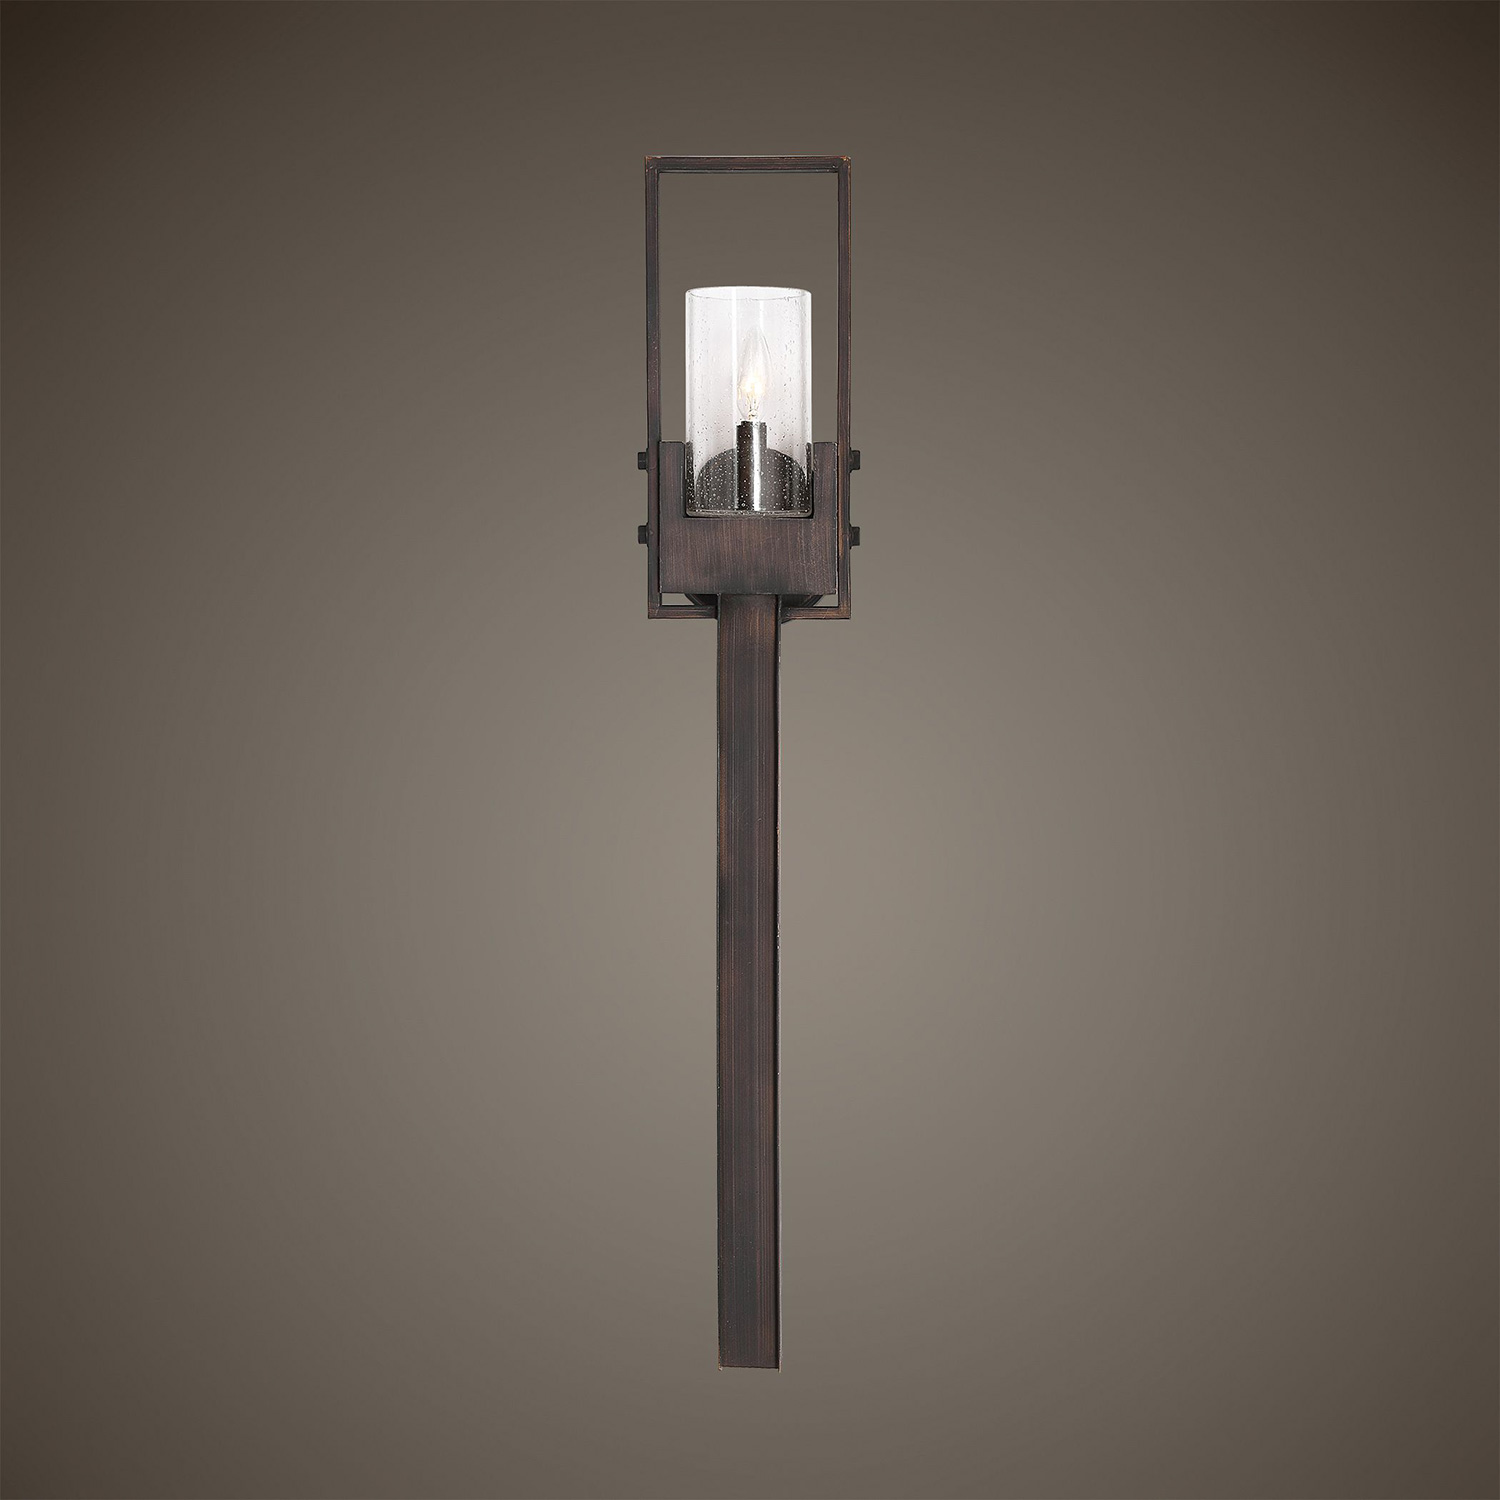 Uttermost Pinecroft Light Sconce - Rustic